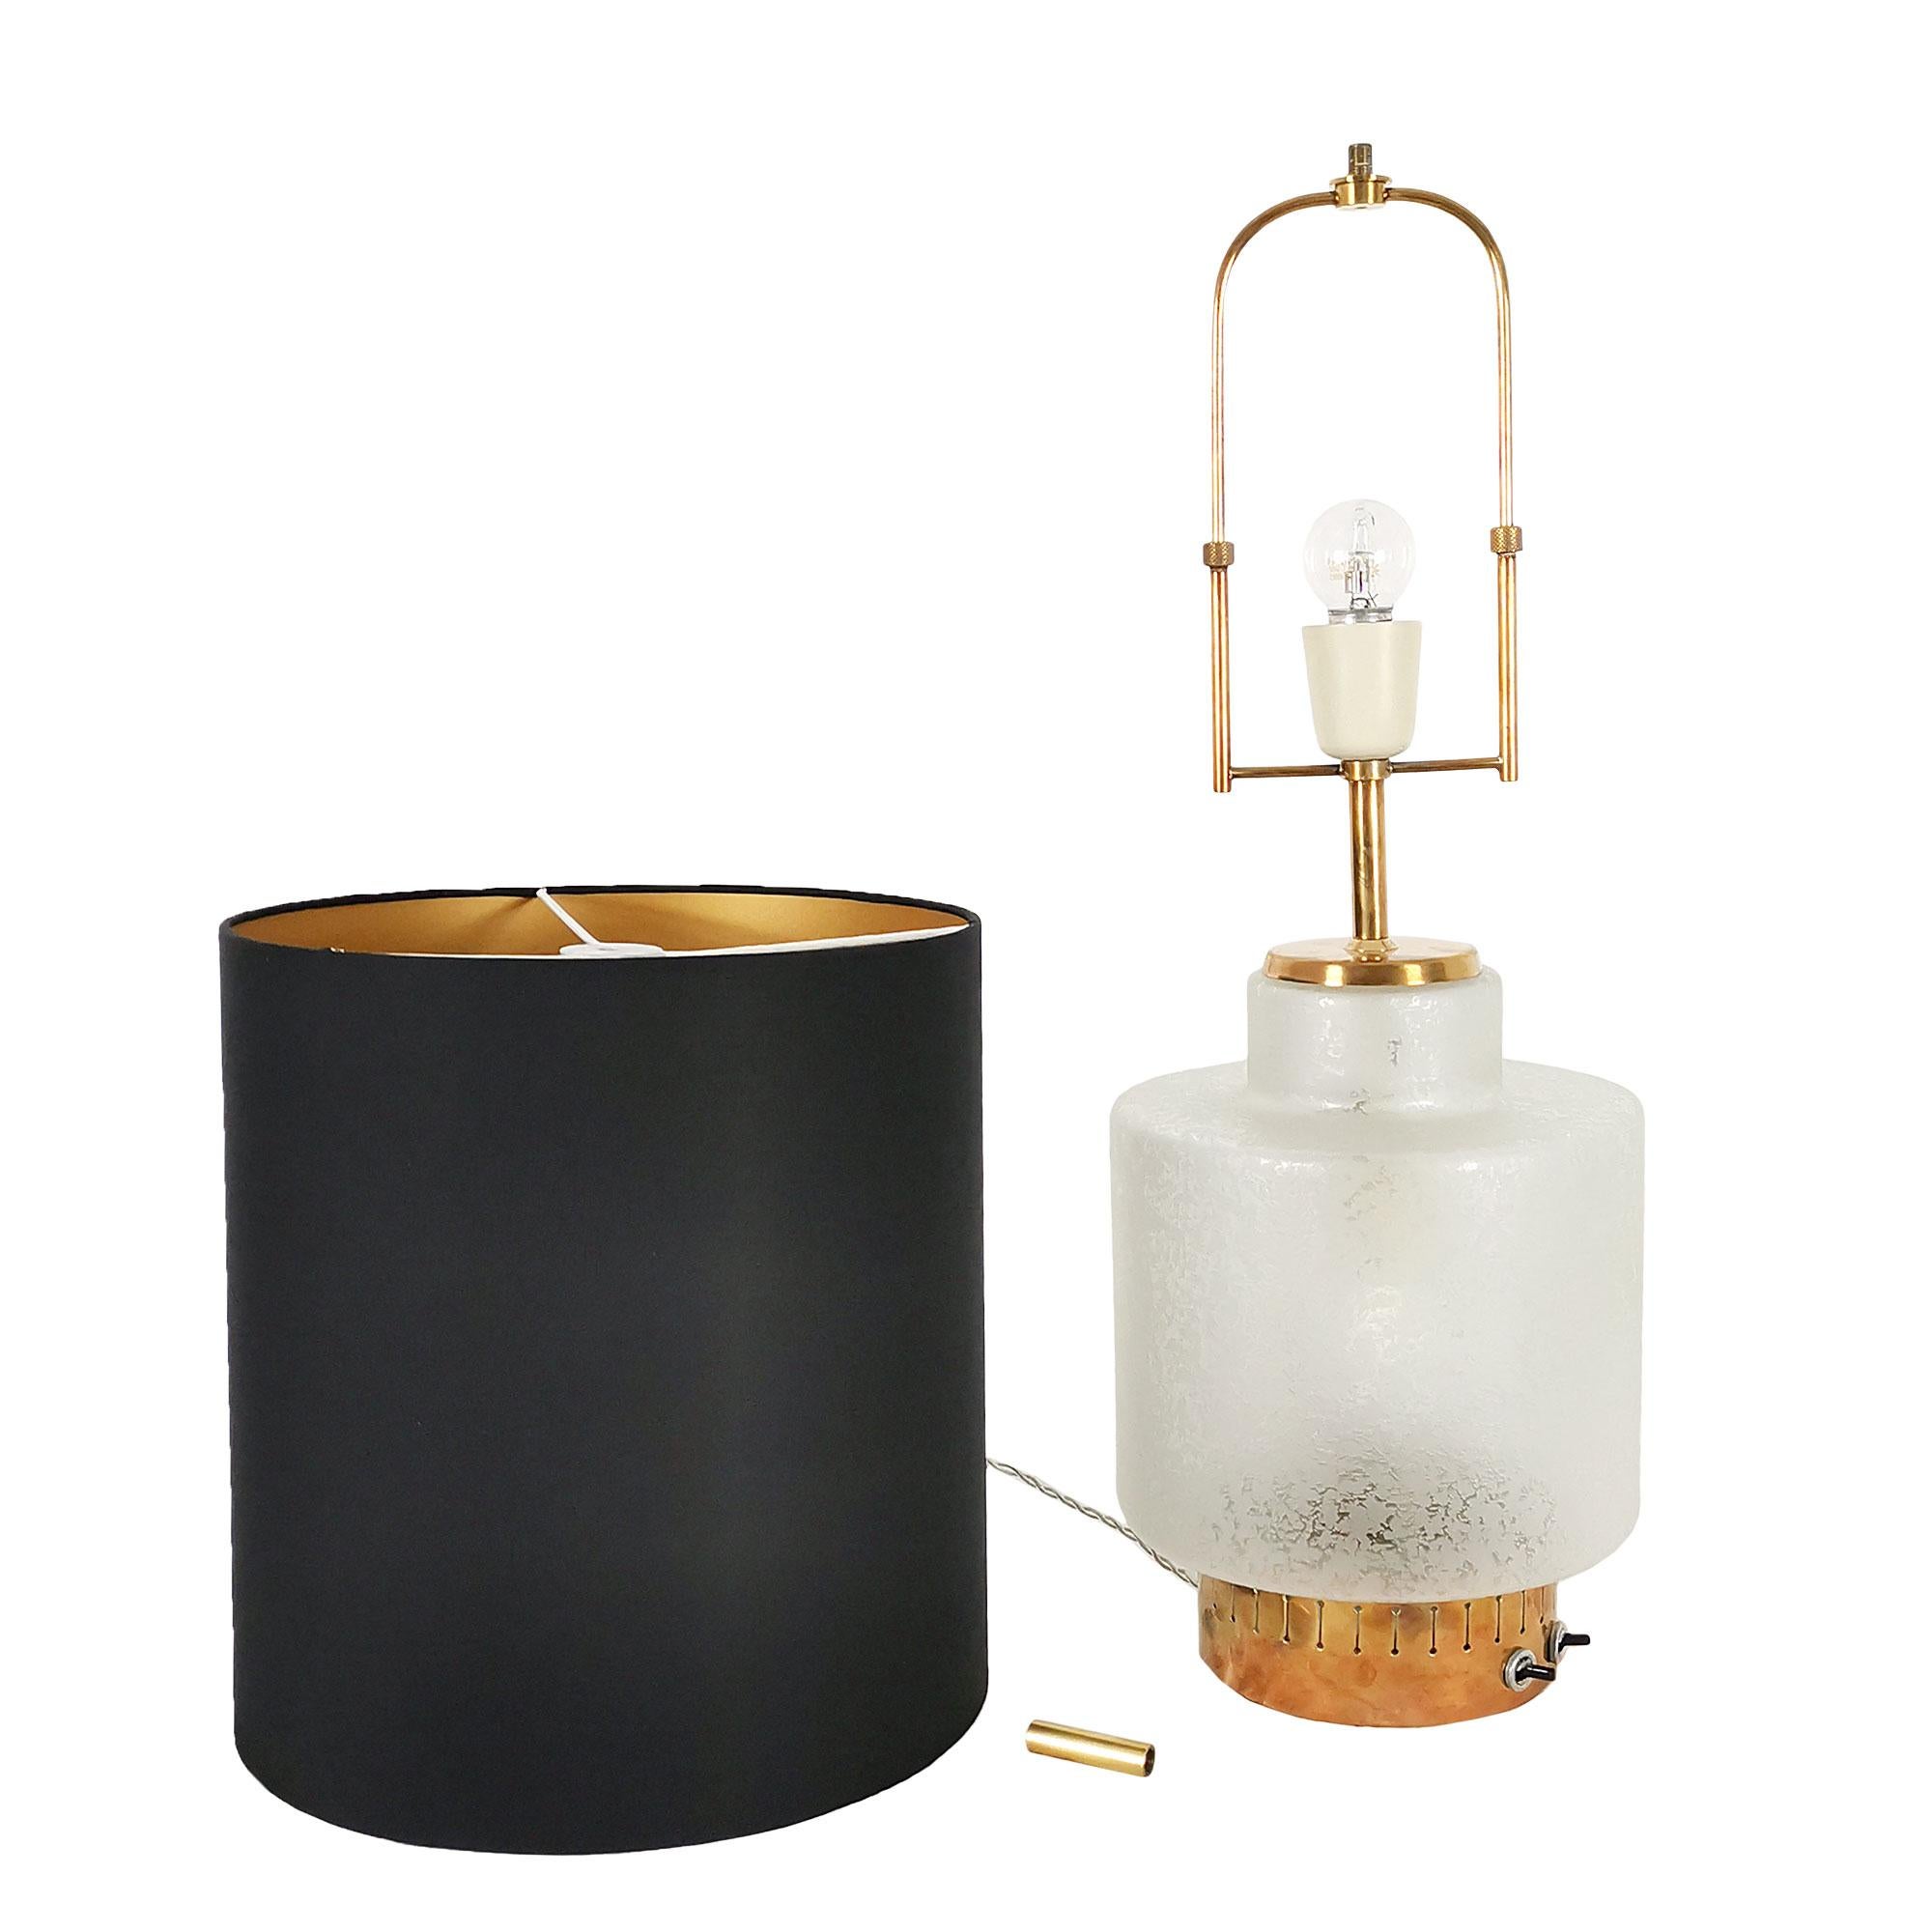 Italian Mid-Century Modern Table Lamp by Stilnovo, Brass and Acid Worked Glass - Italy